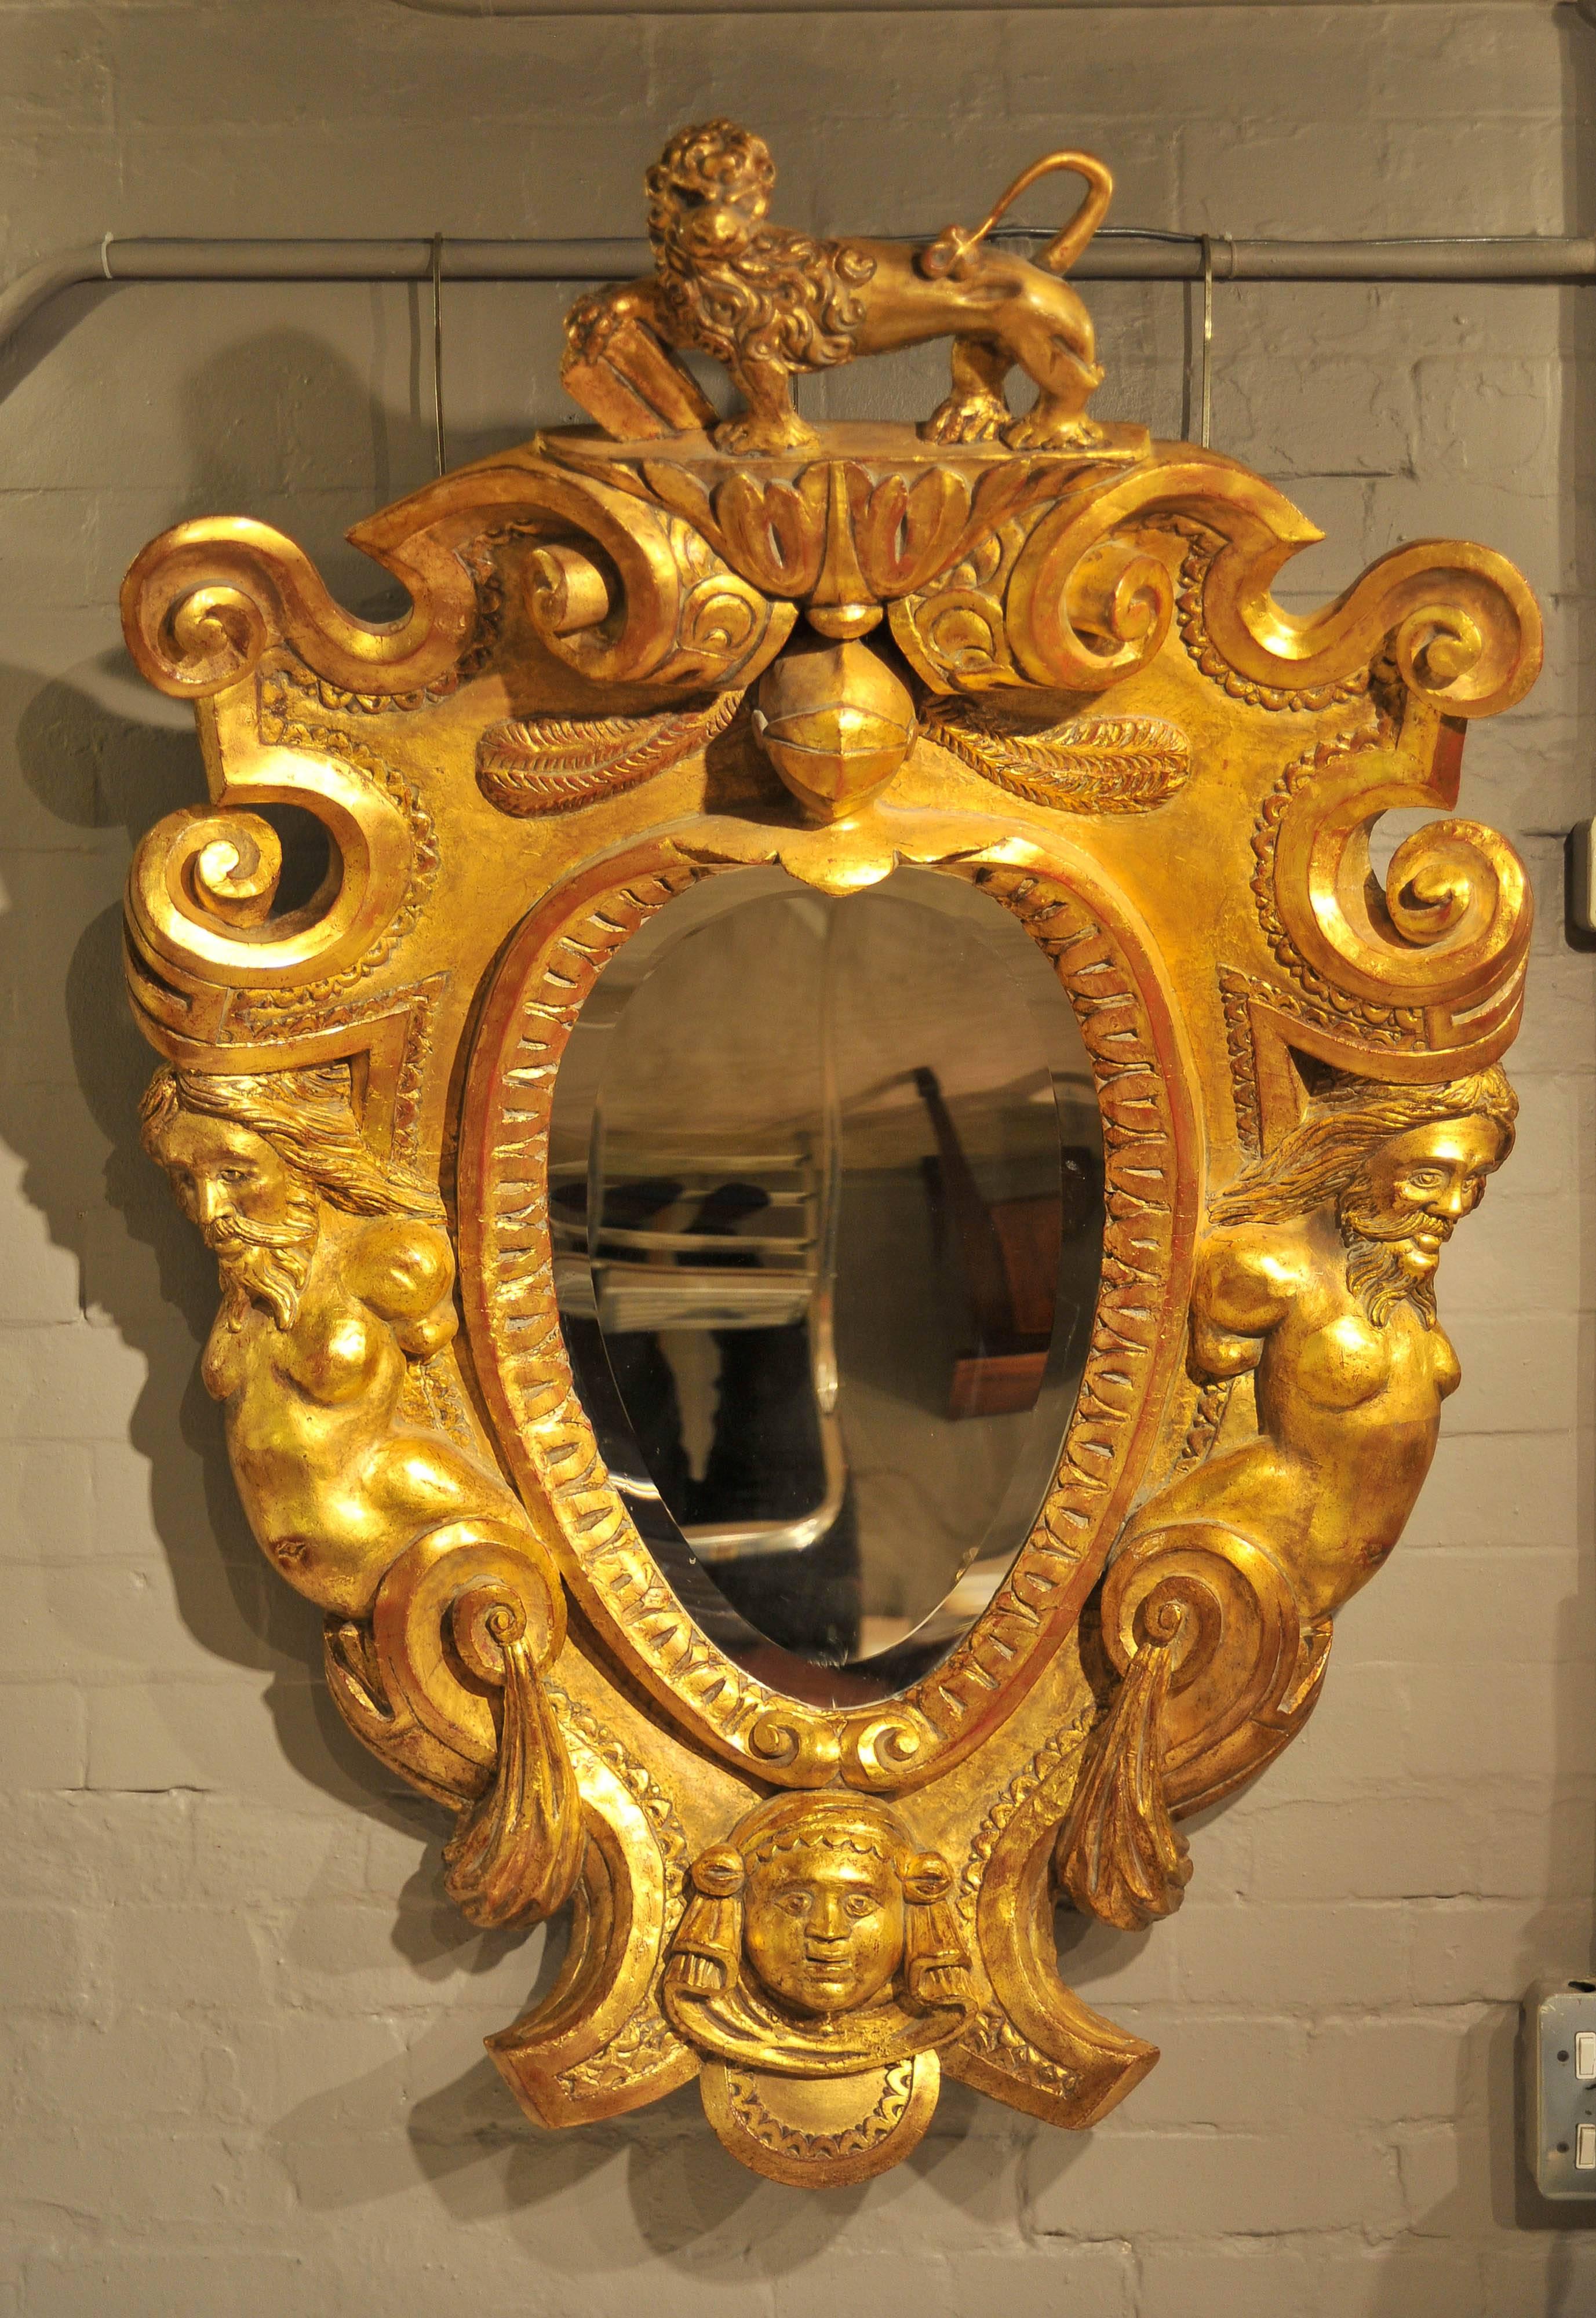 A majestic Baroque period Italian carved wood frame with curved mirror plate.
Most likely to have be designed and made to contain an heraldic coat of arms.
The 